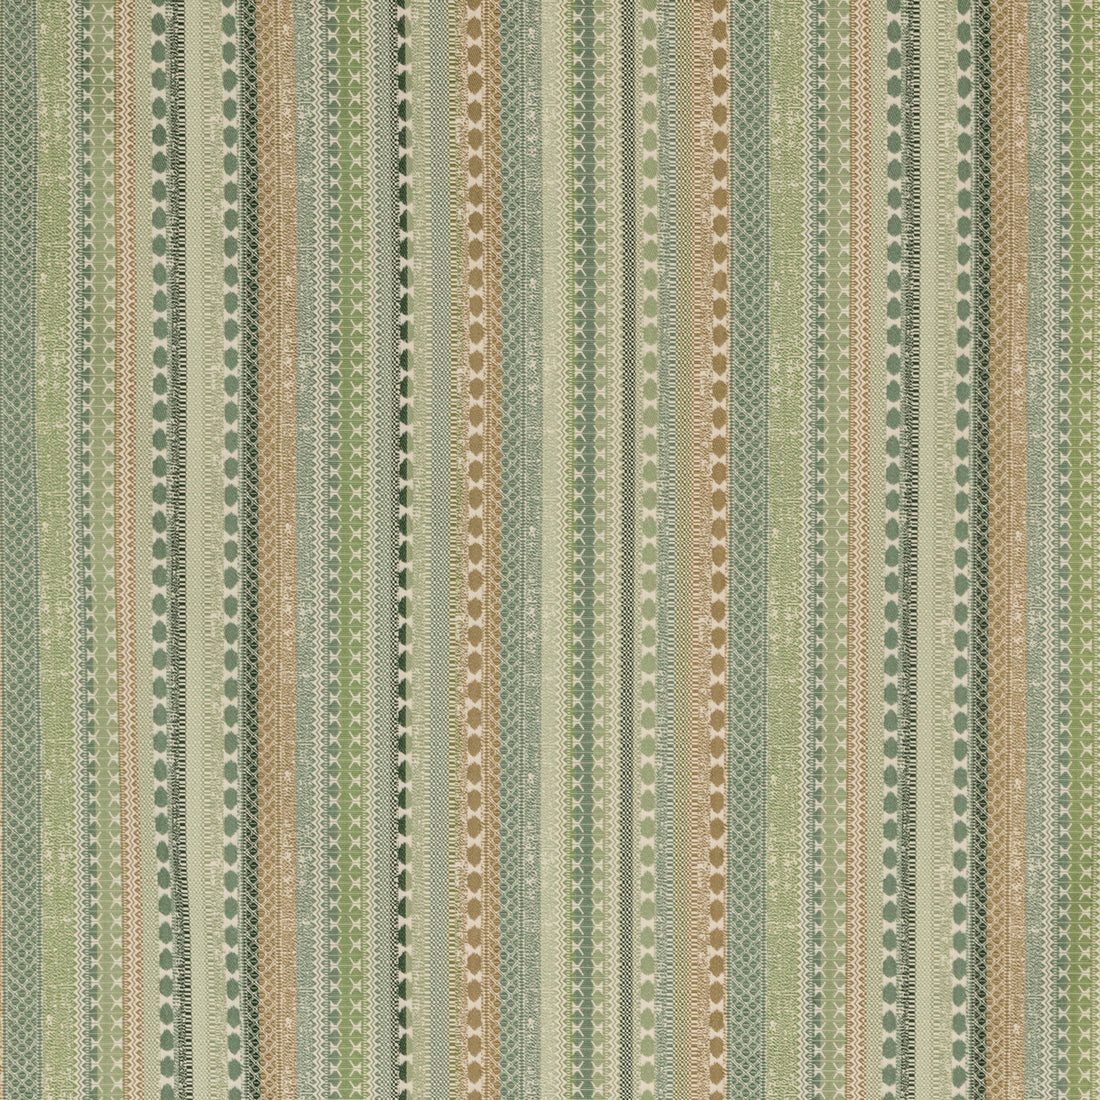 Palmete Weave fabric in spruce color - pattern 2021101.330.0 - by Lee Jofa in the Triana Weaves collection